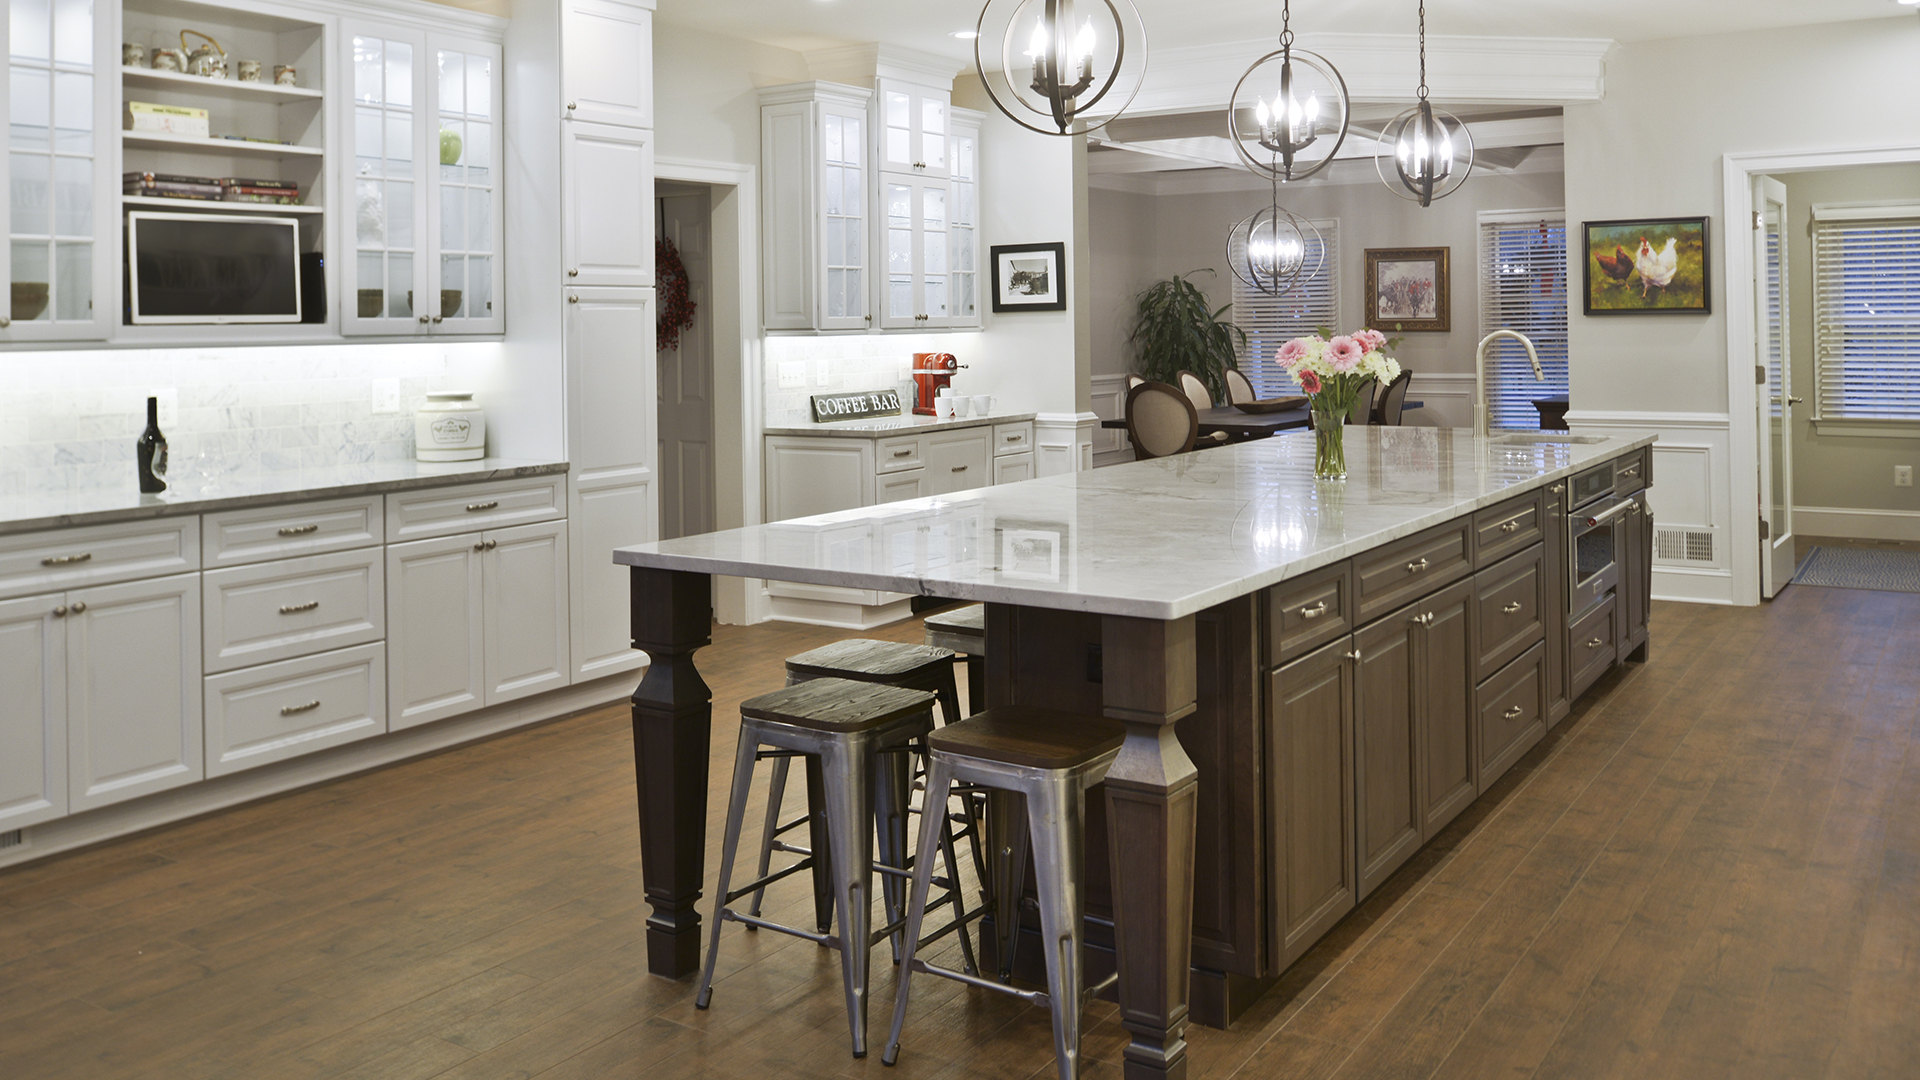 2020 Best in American Living Award Kitchen, over $125,000